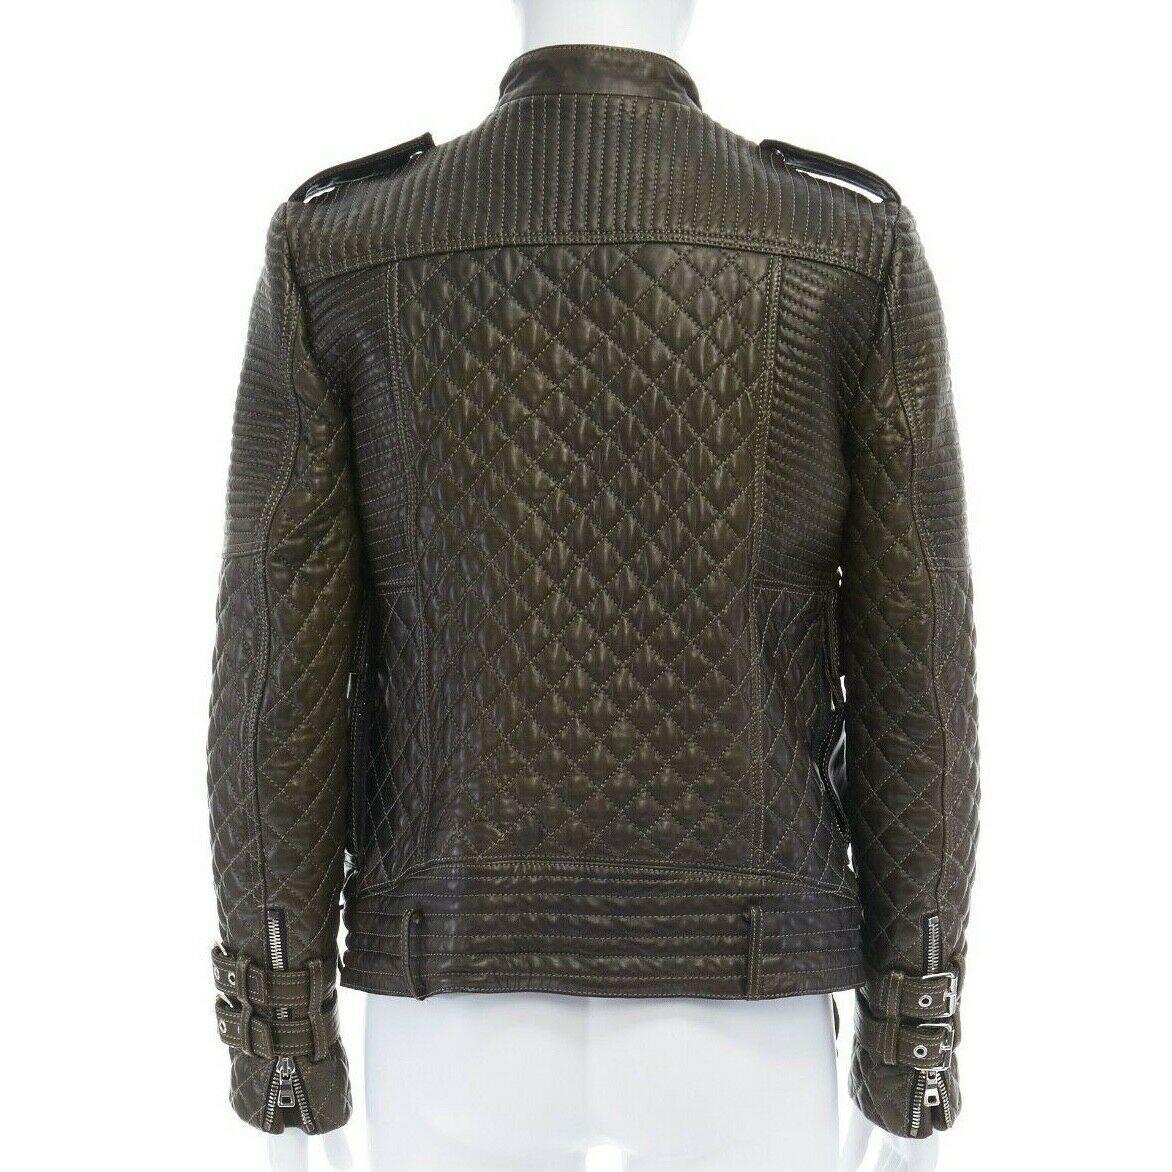 runway BALMAIN ROUSTEING green quilted leather motorcycle biker jacket EU48 M

BALMAIN BY OLIVIER ROUSTEING
FROM THE FALL WINTER 2014 RUNWAY
Lambskin, cotton, viscose. Dark green leather. 
Contrast quilring throughout. Asymmetric silver-tone zip